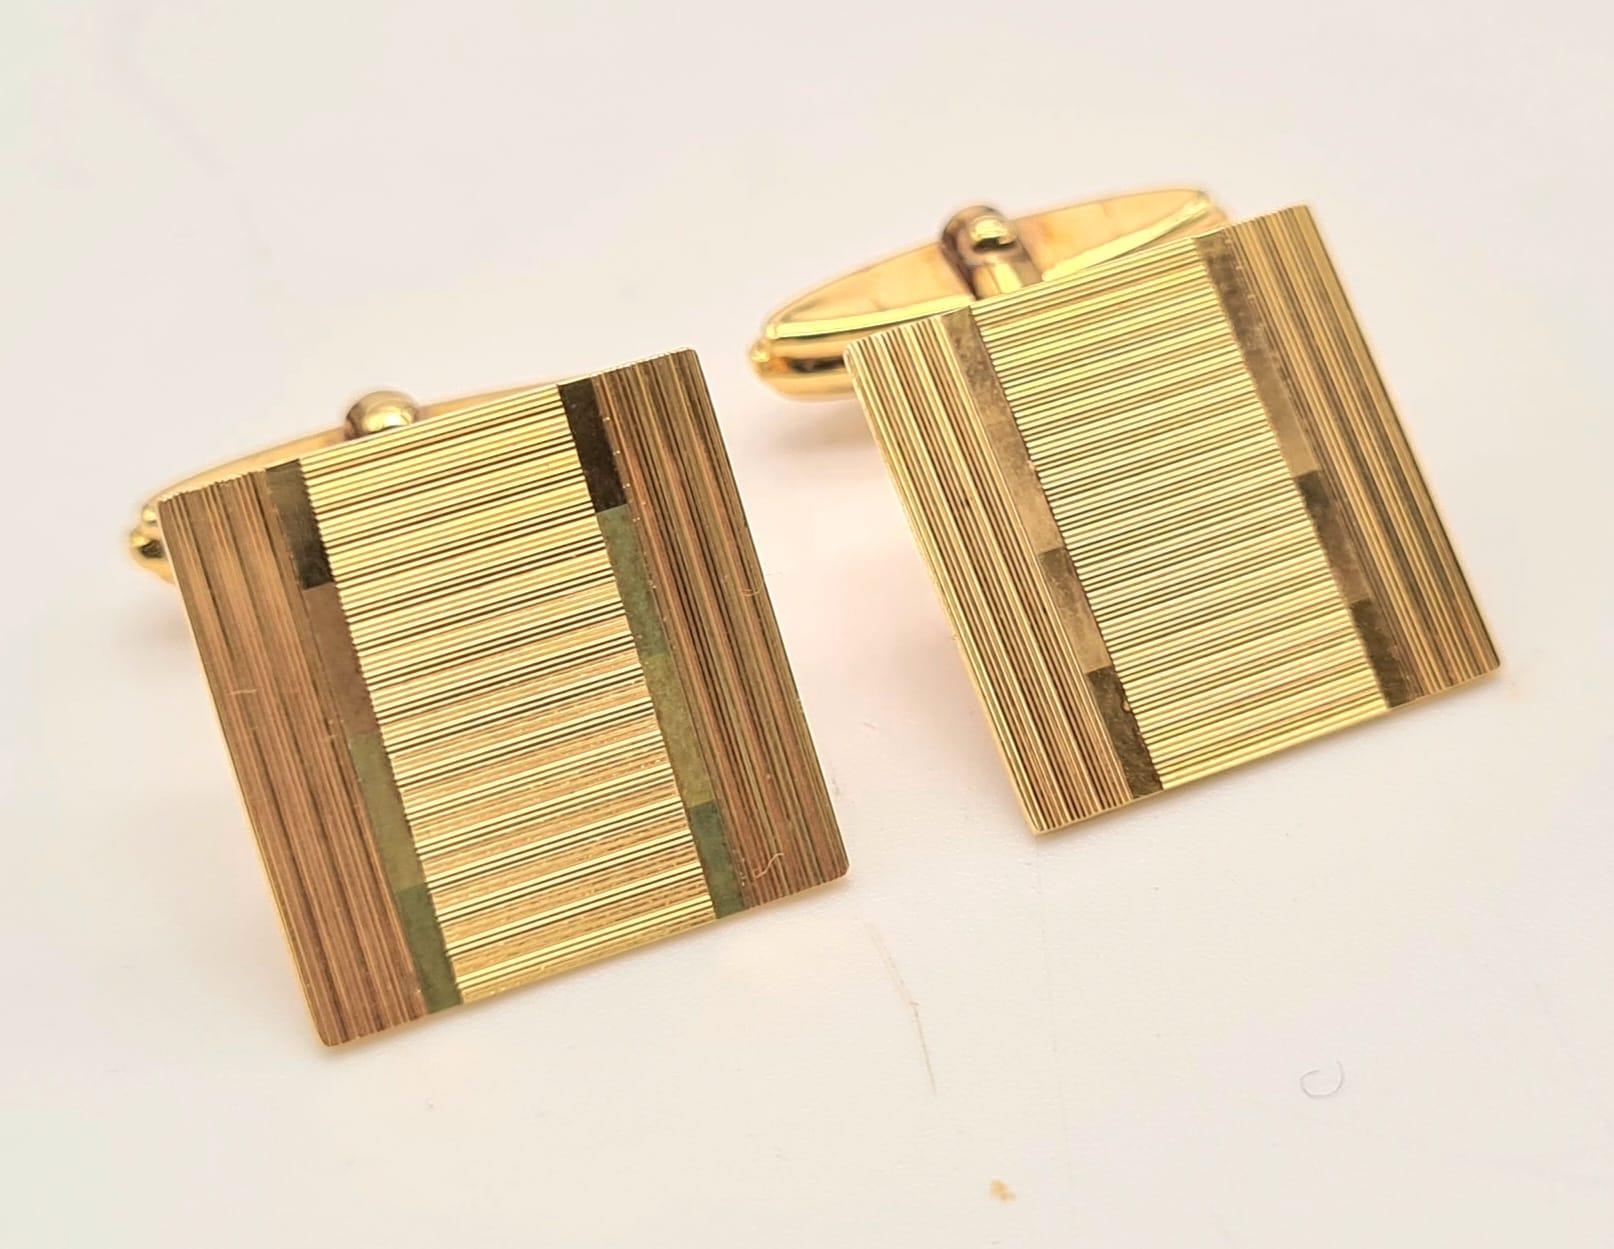 A Pair of Vintage 9K Yellow Gold Flat-Square Cufflinks - these are making a comeback! 7.06g total - Image 2 of 7